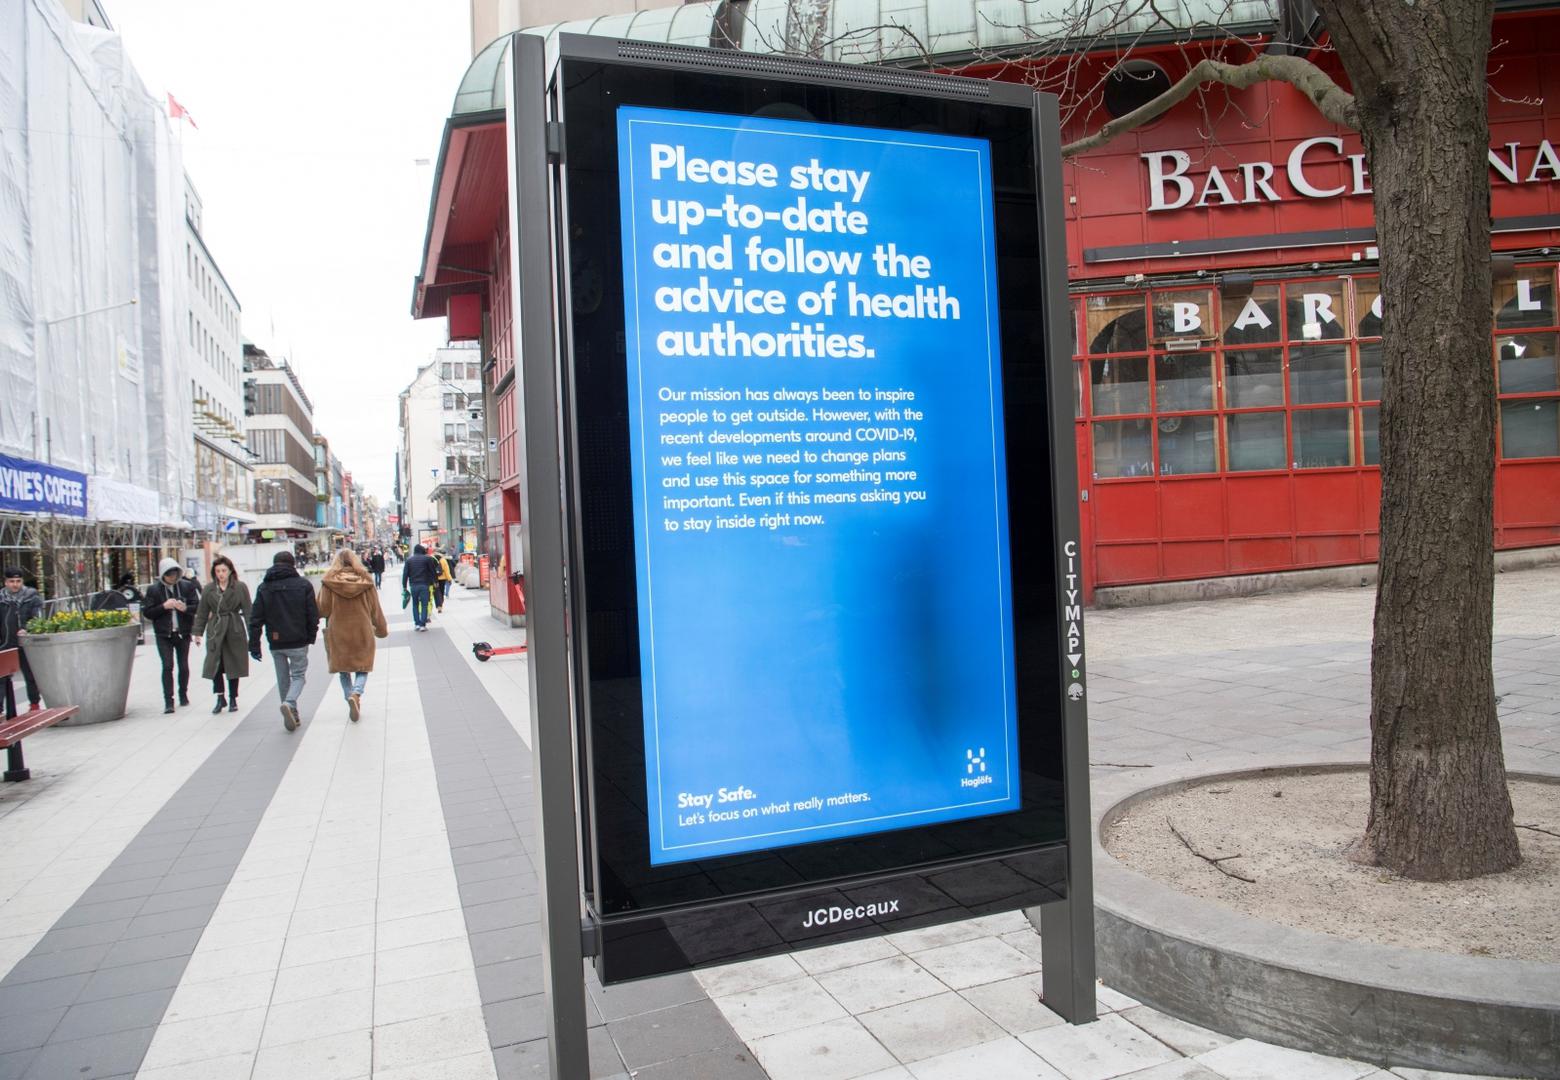 A billboard with information about coronavirus is seen, in a street with less pedestrian traffic than usual as a result of the coronavirus disease (COVID-19) outbreak in Stockholm A billboard with information about coronavirus is seen, in a street with less pedestrian traffic than usual as a result of the coronavirus disease (COVID-19) outbreak in Stockholm, Sweden April 1, 2020. TT News Agency/Fredrik Sandberg via REUTERS      ATTENTION EDITORS - THIS IMAGE WAS PROVIDED BY A THIRD PARTY. SWEDEN OUT. NO COMMERCIAL OR EDITORIAL SALES IN SWEDEN. TT NEWS AGENCY